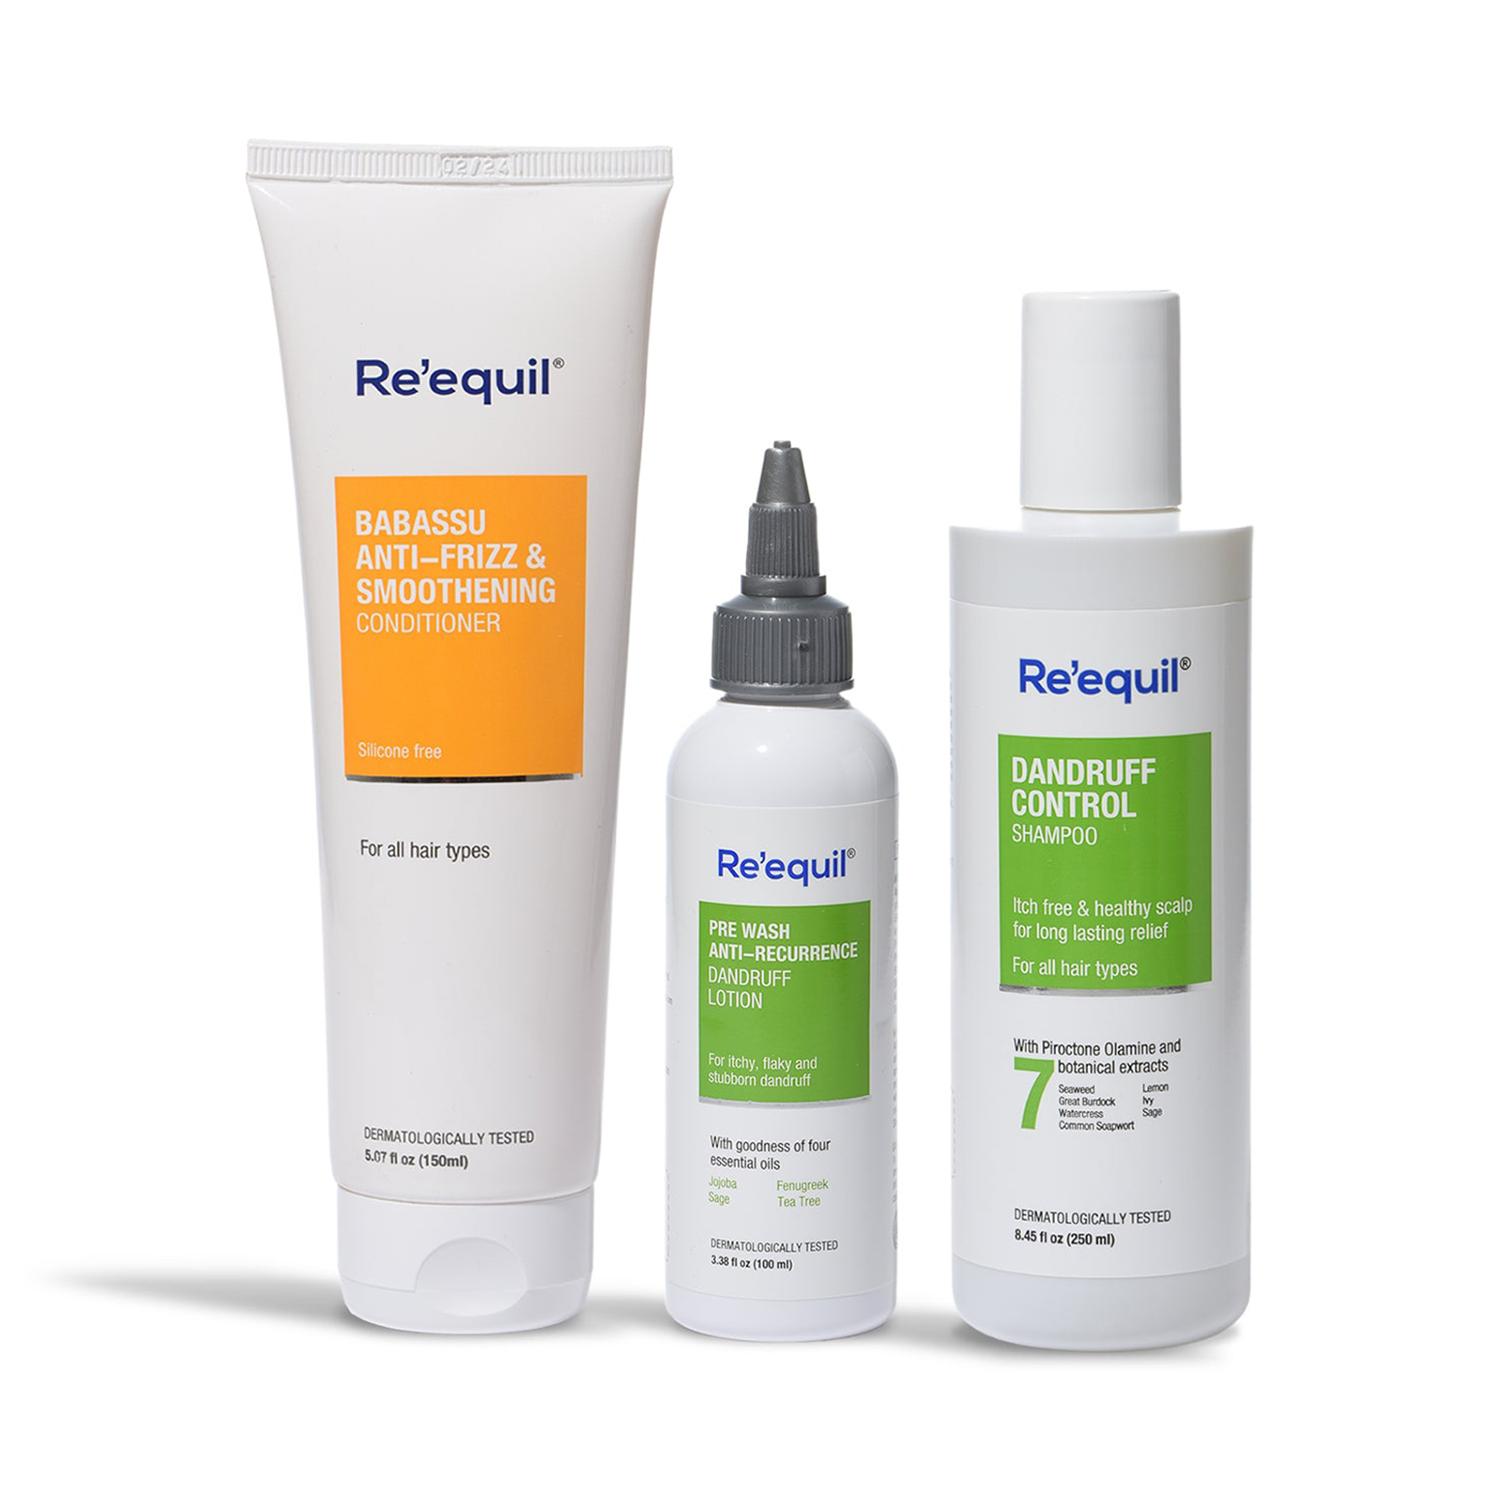 Re'equil | Re'equil Dandruff Treatment Bundle